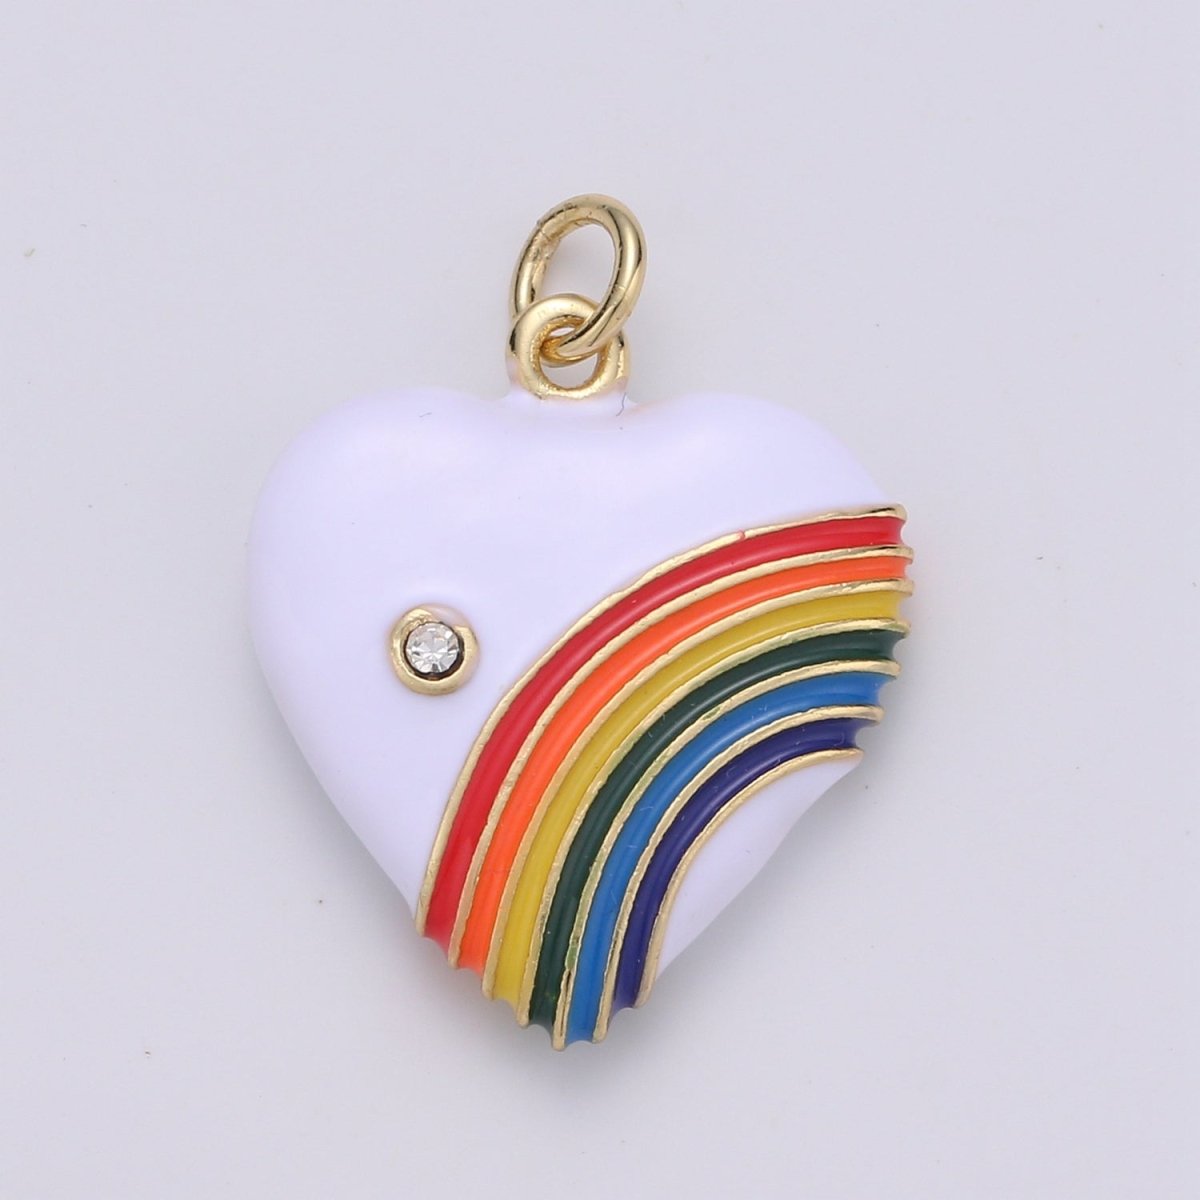 Rainbow Heart Charms, Enamel with Cubic Zirconia Crystal, Retro 1980's Style Charm Vintage Heart Pendant Red, Pink, Turquoise, Purple, Red C-805~C-812 - DLUXCA